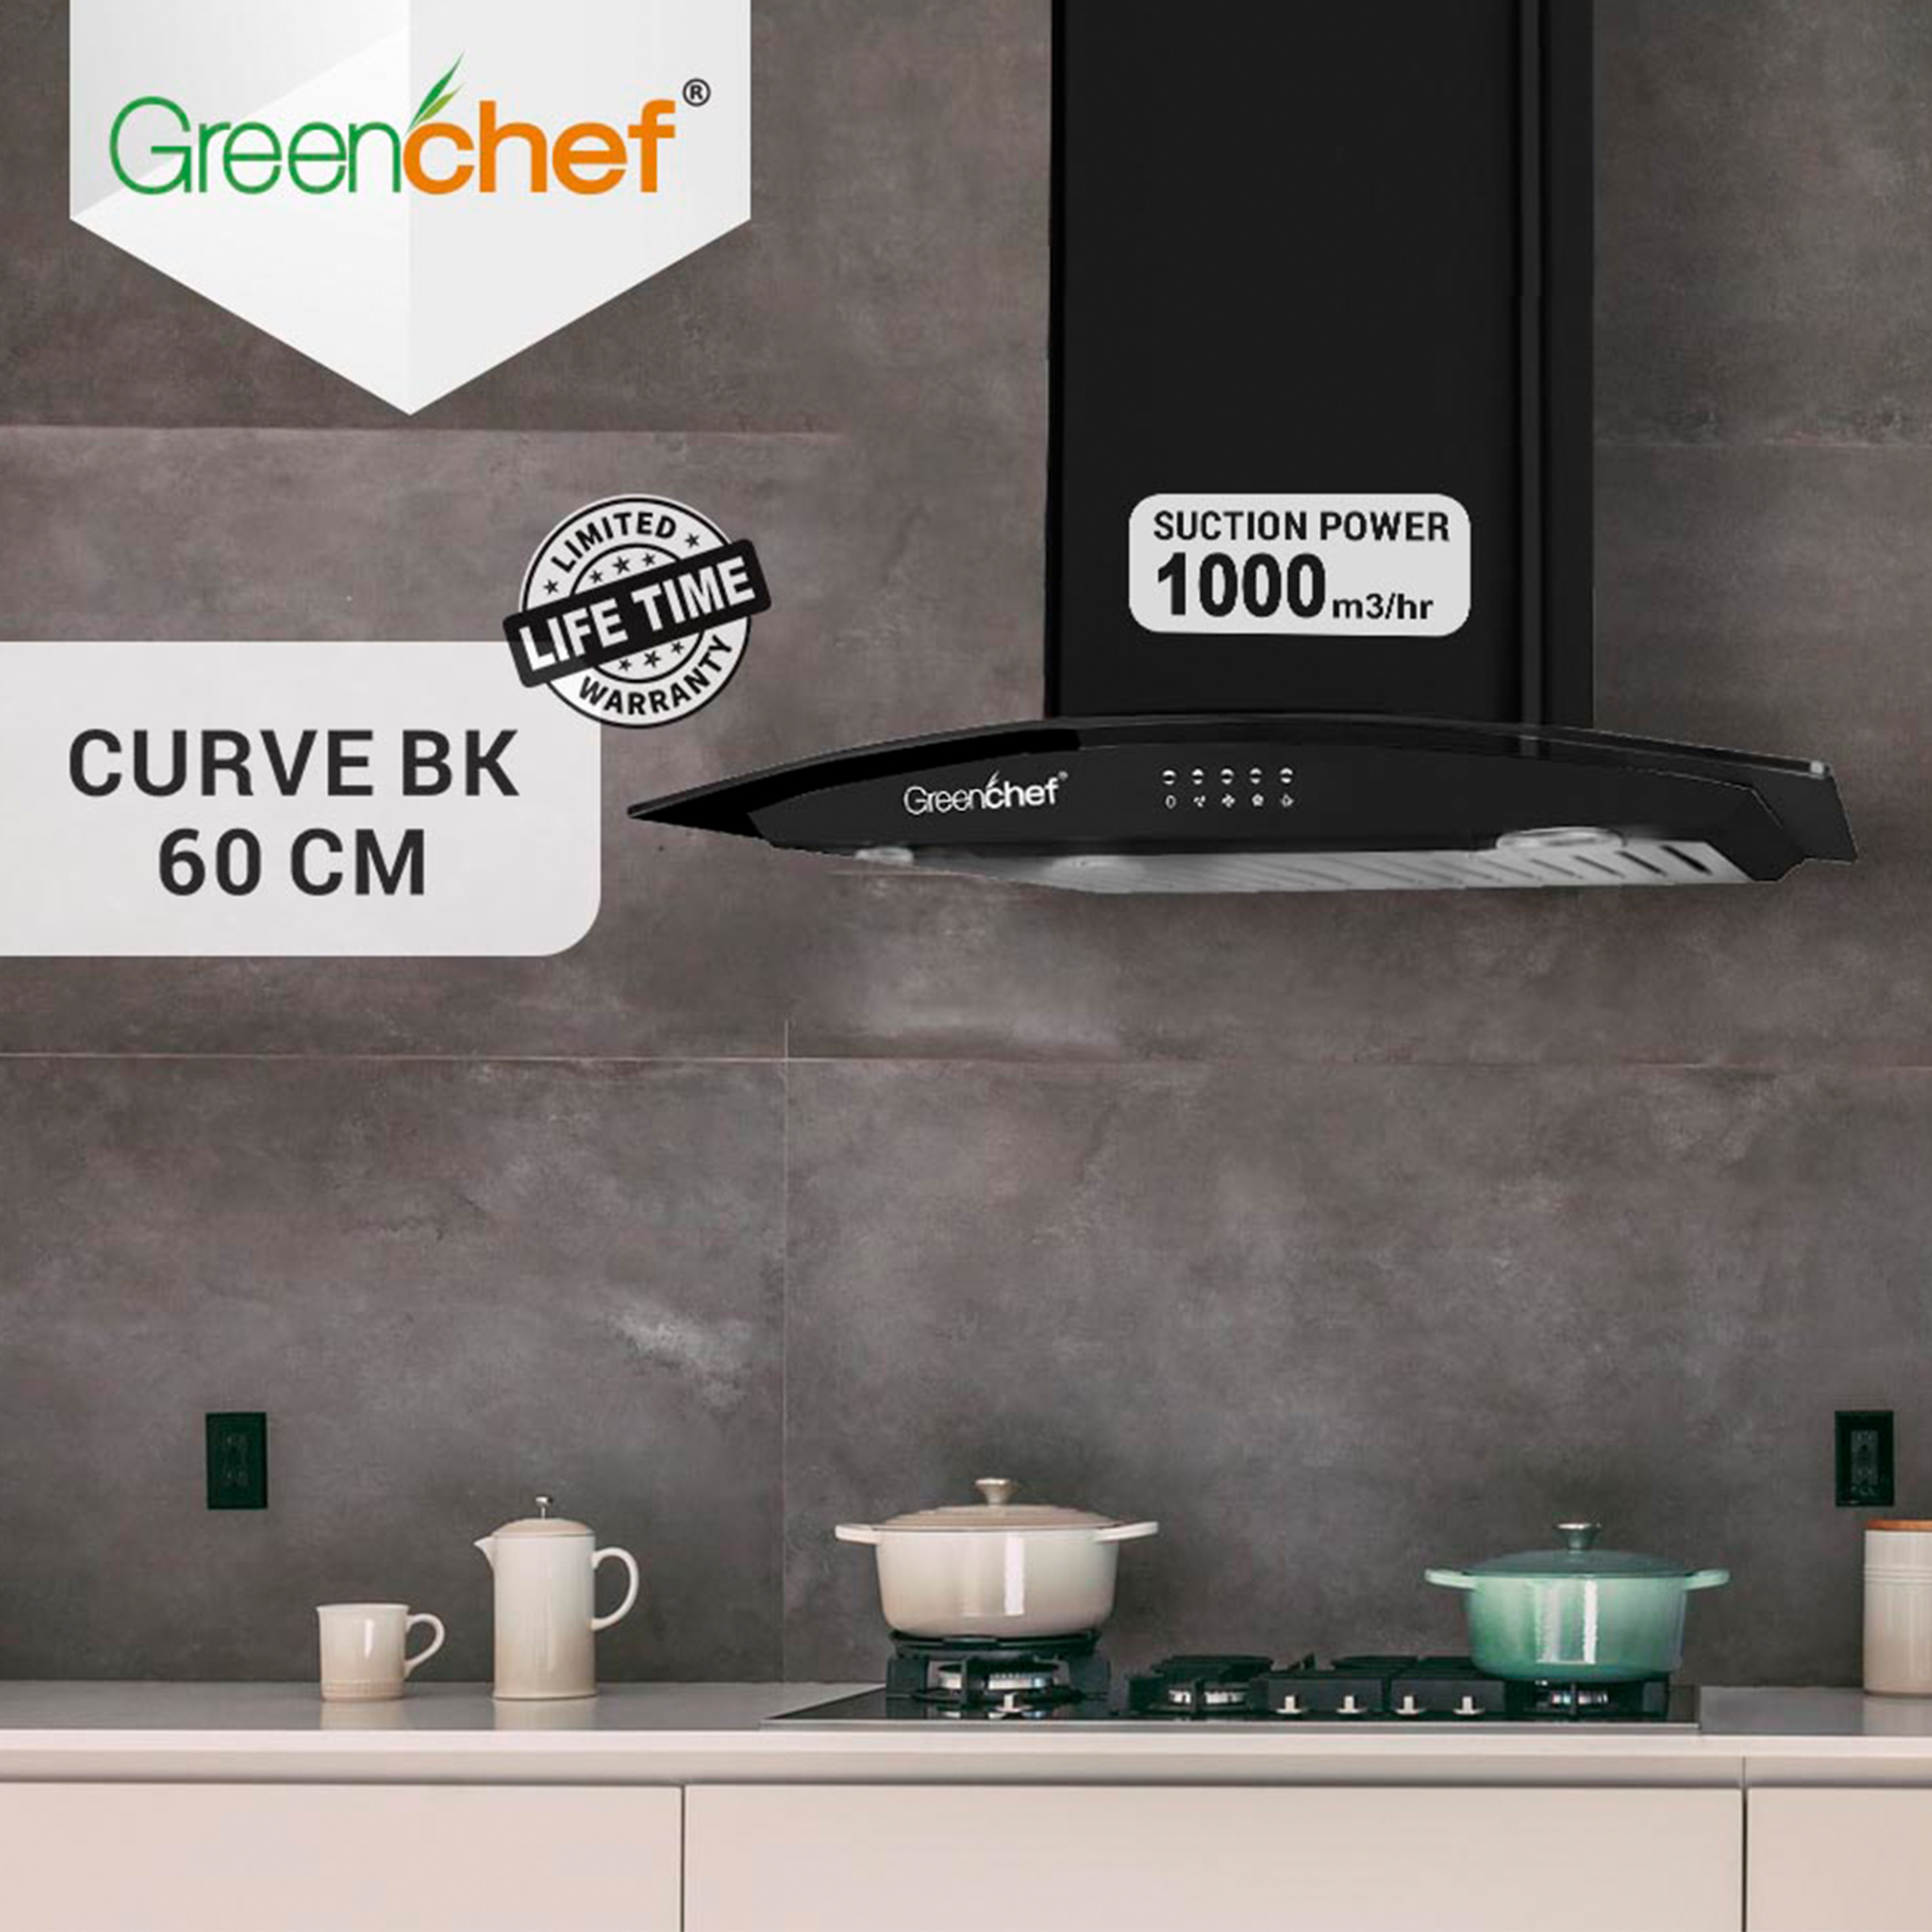 Greenchef Appliances Limited   One stop solution for home and kitchen